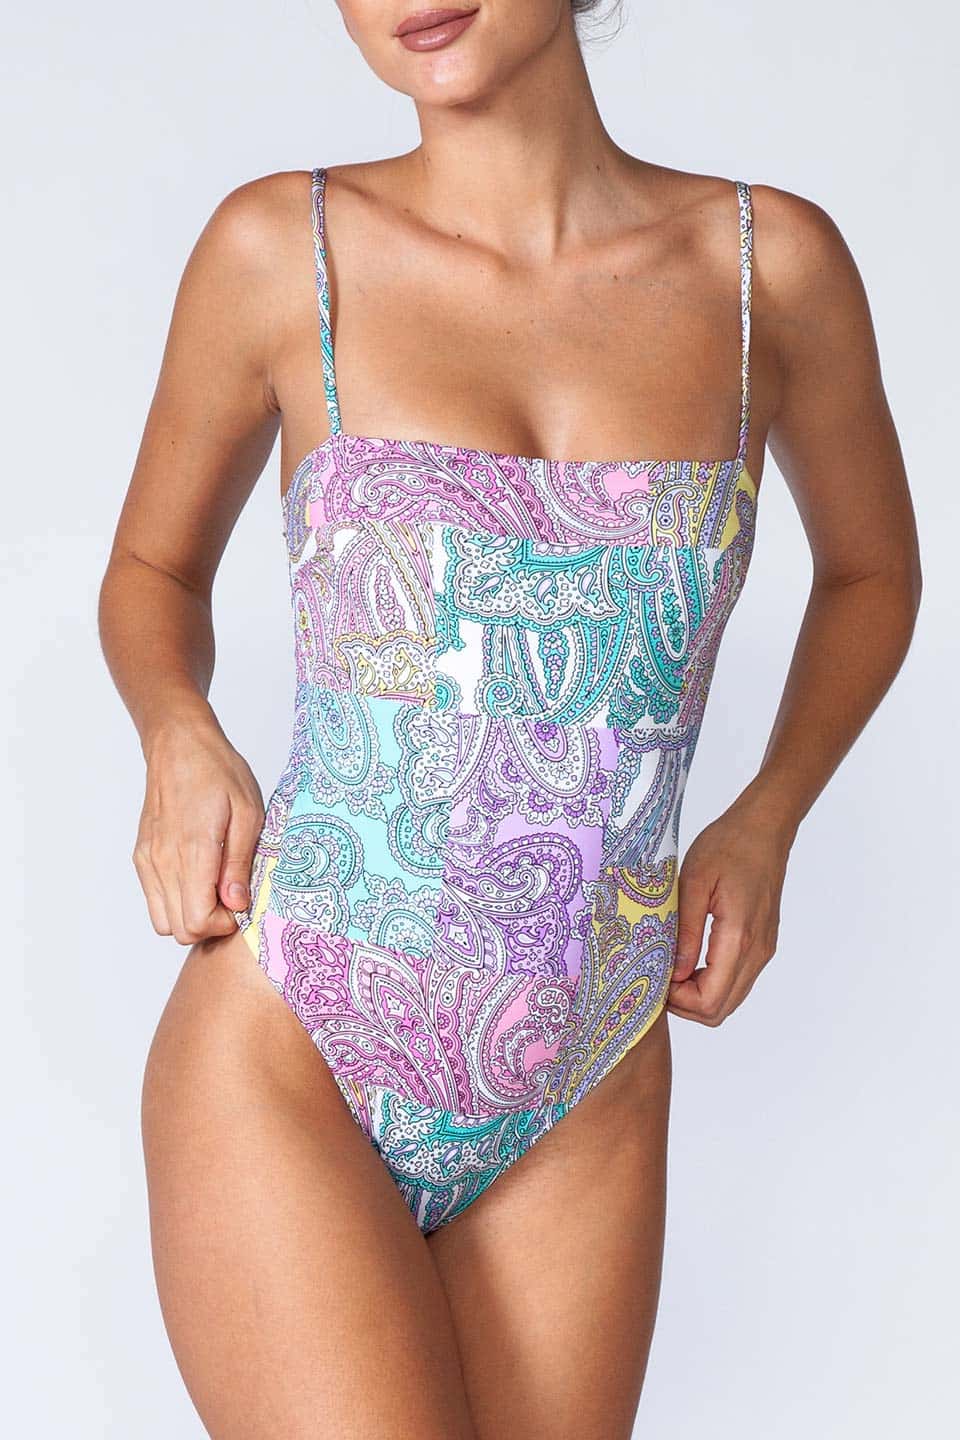 Thumbnail for Product gallery 5, Blume Swimsuit Patch Paisley from MC2 Saint Barth movement